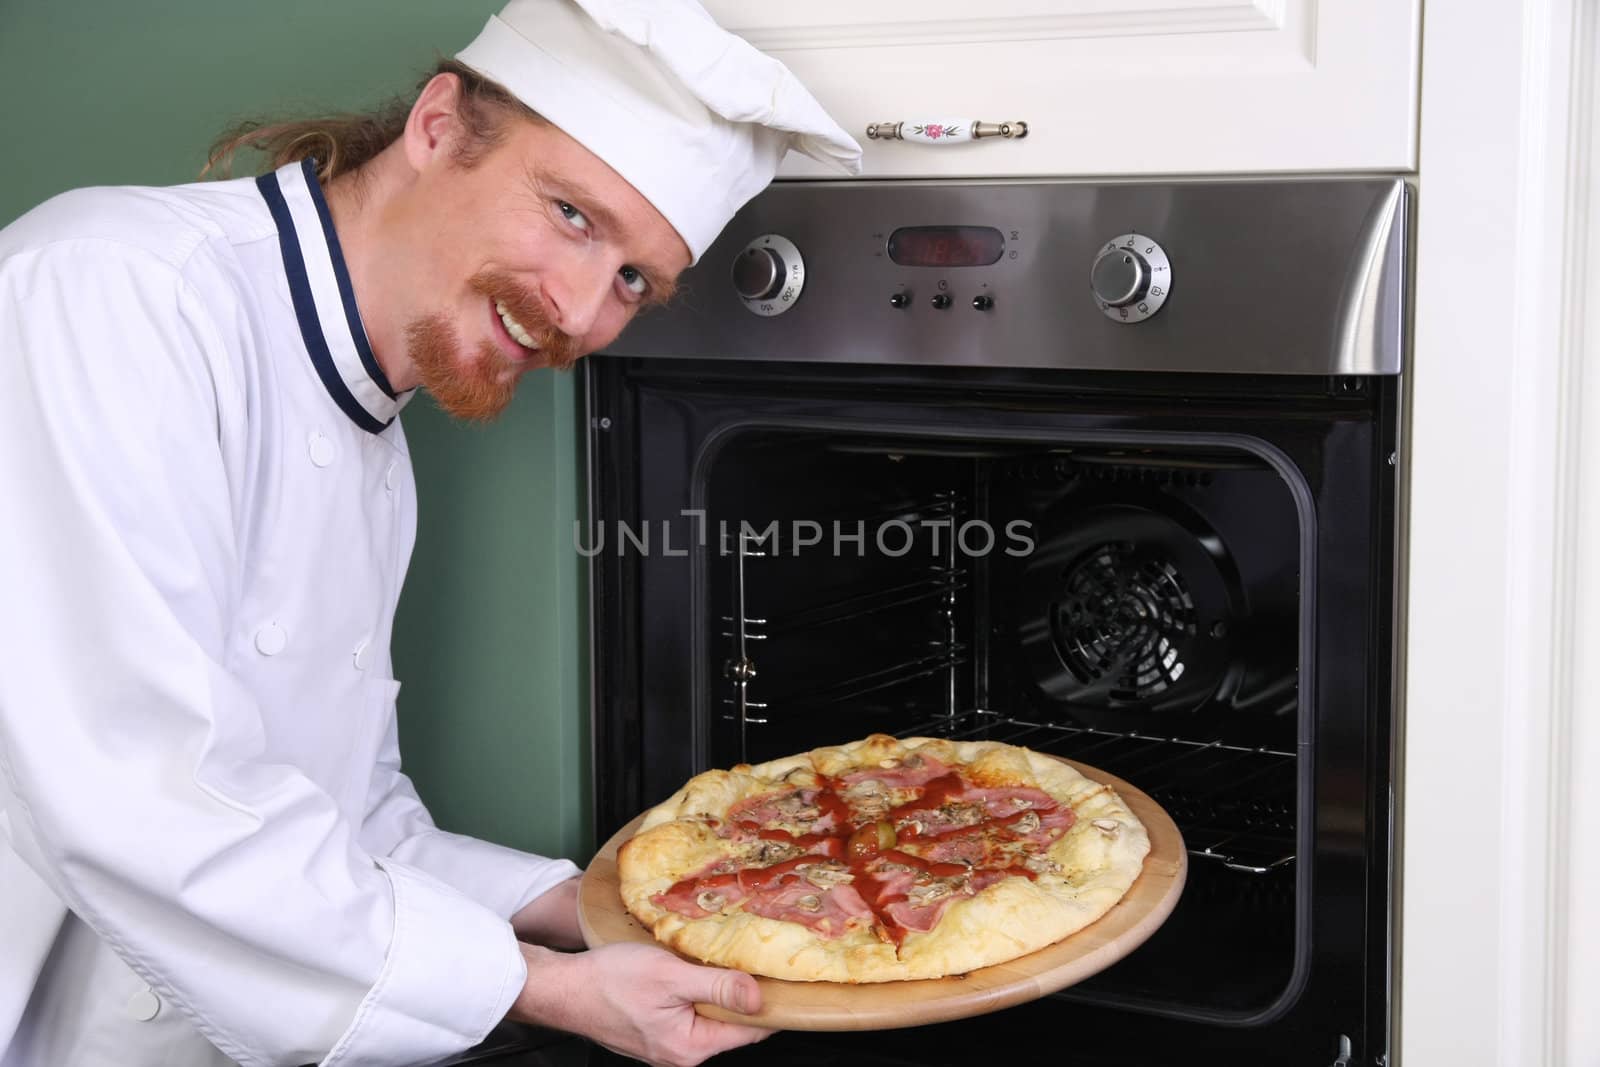 young chef with italian pizza in kitchen